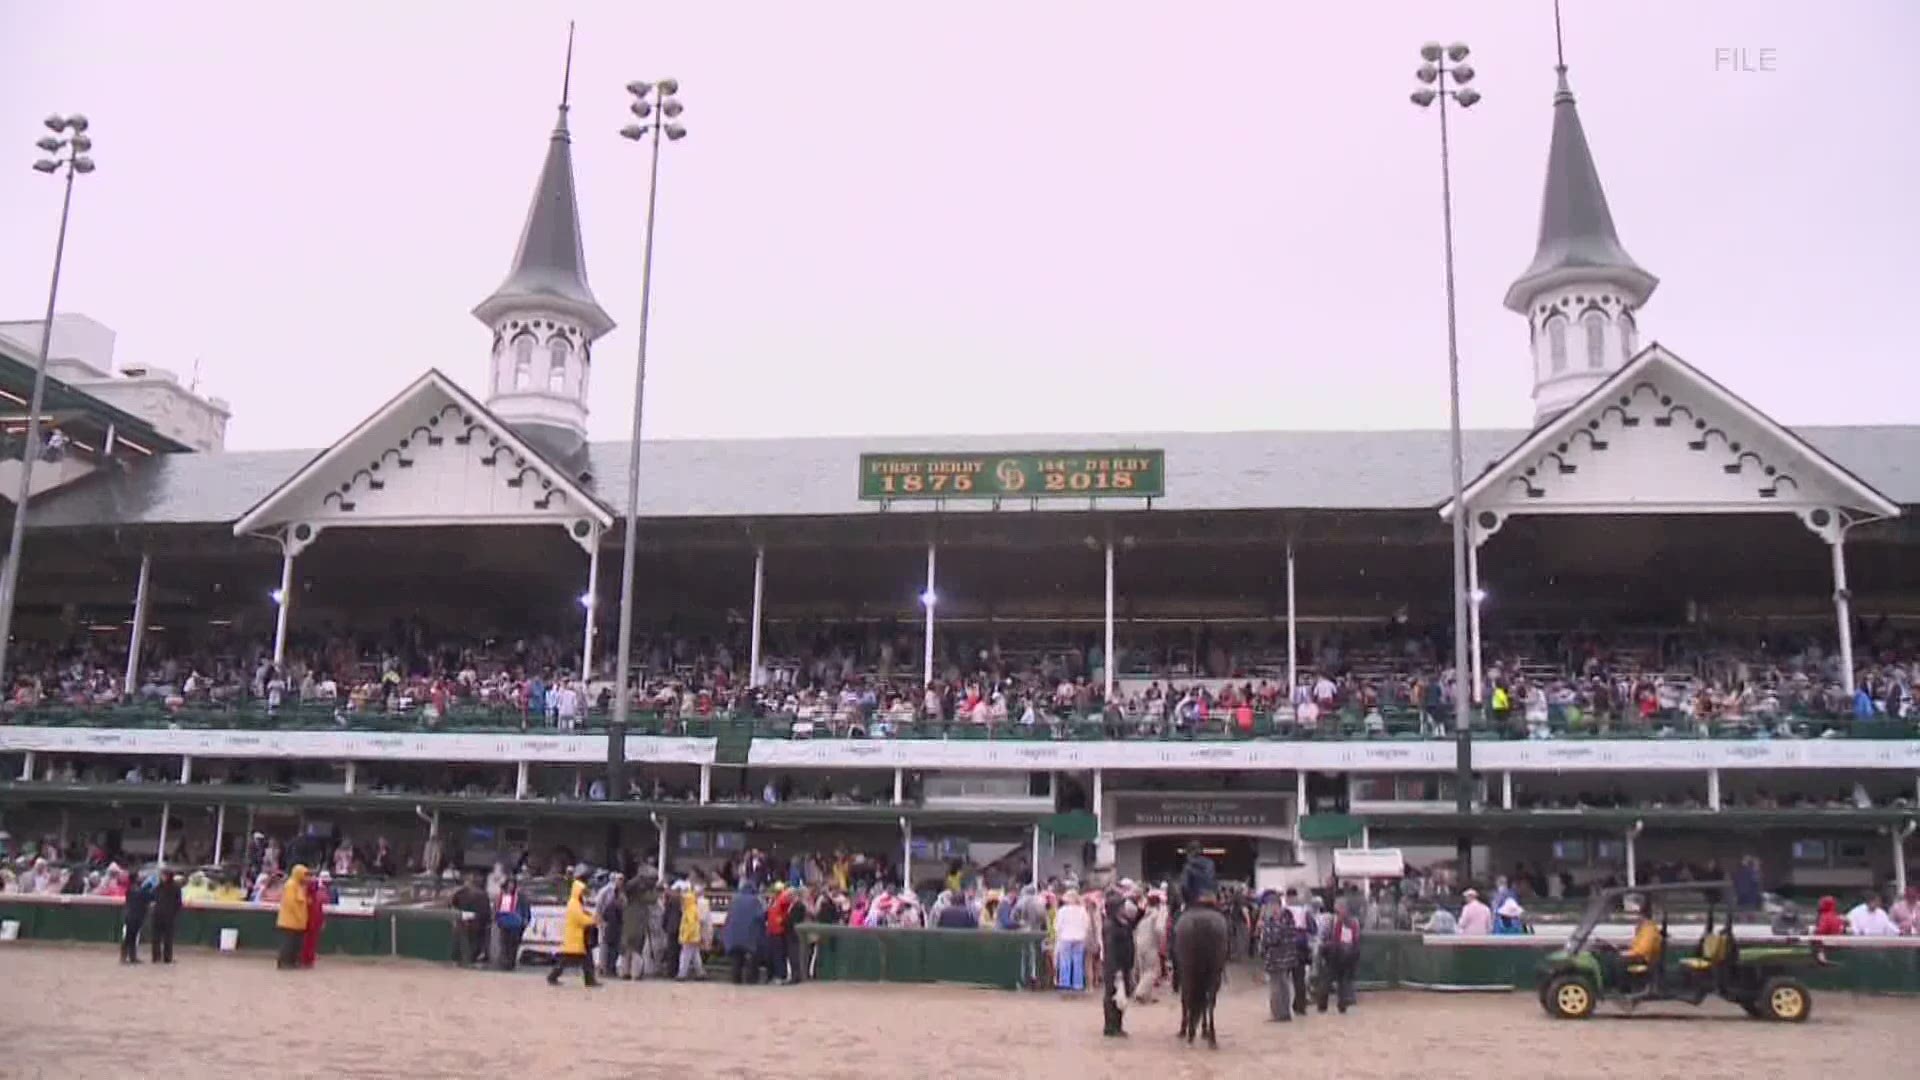 The feel of the Kentucky Derby lies in the fans.